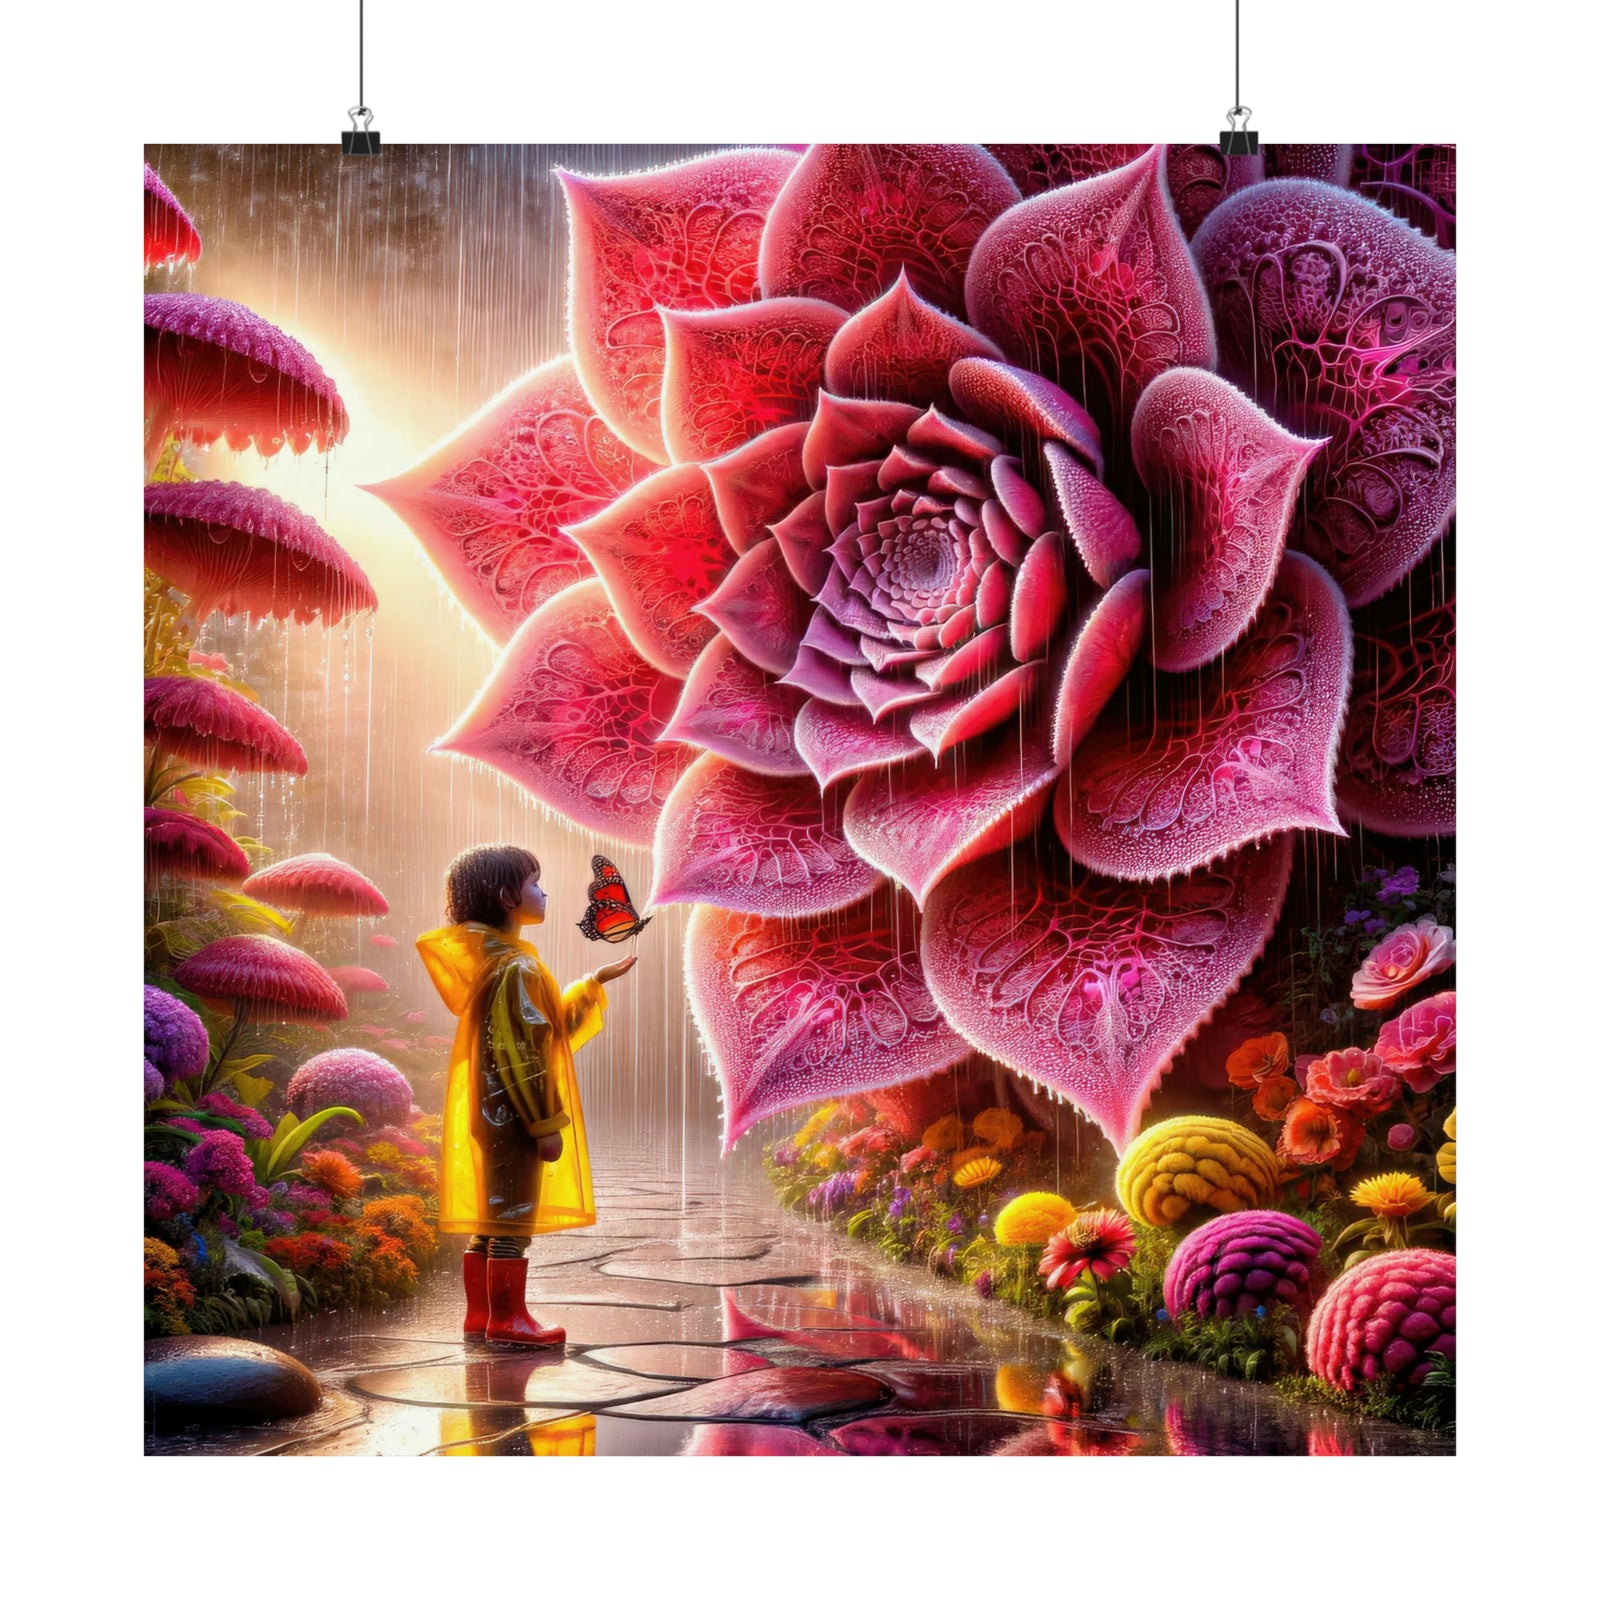 In the Realm of the Floral Giants Poster